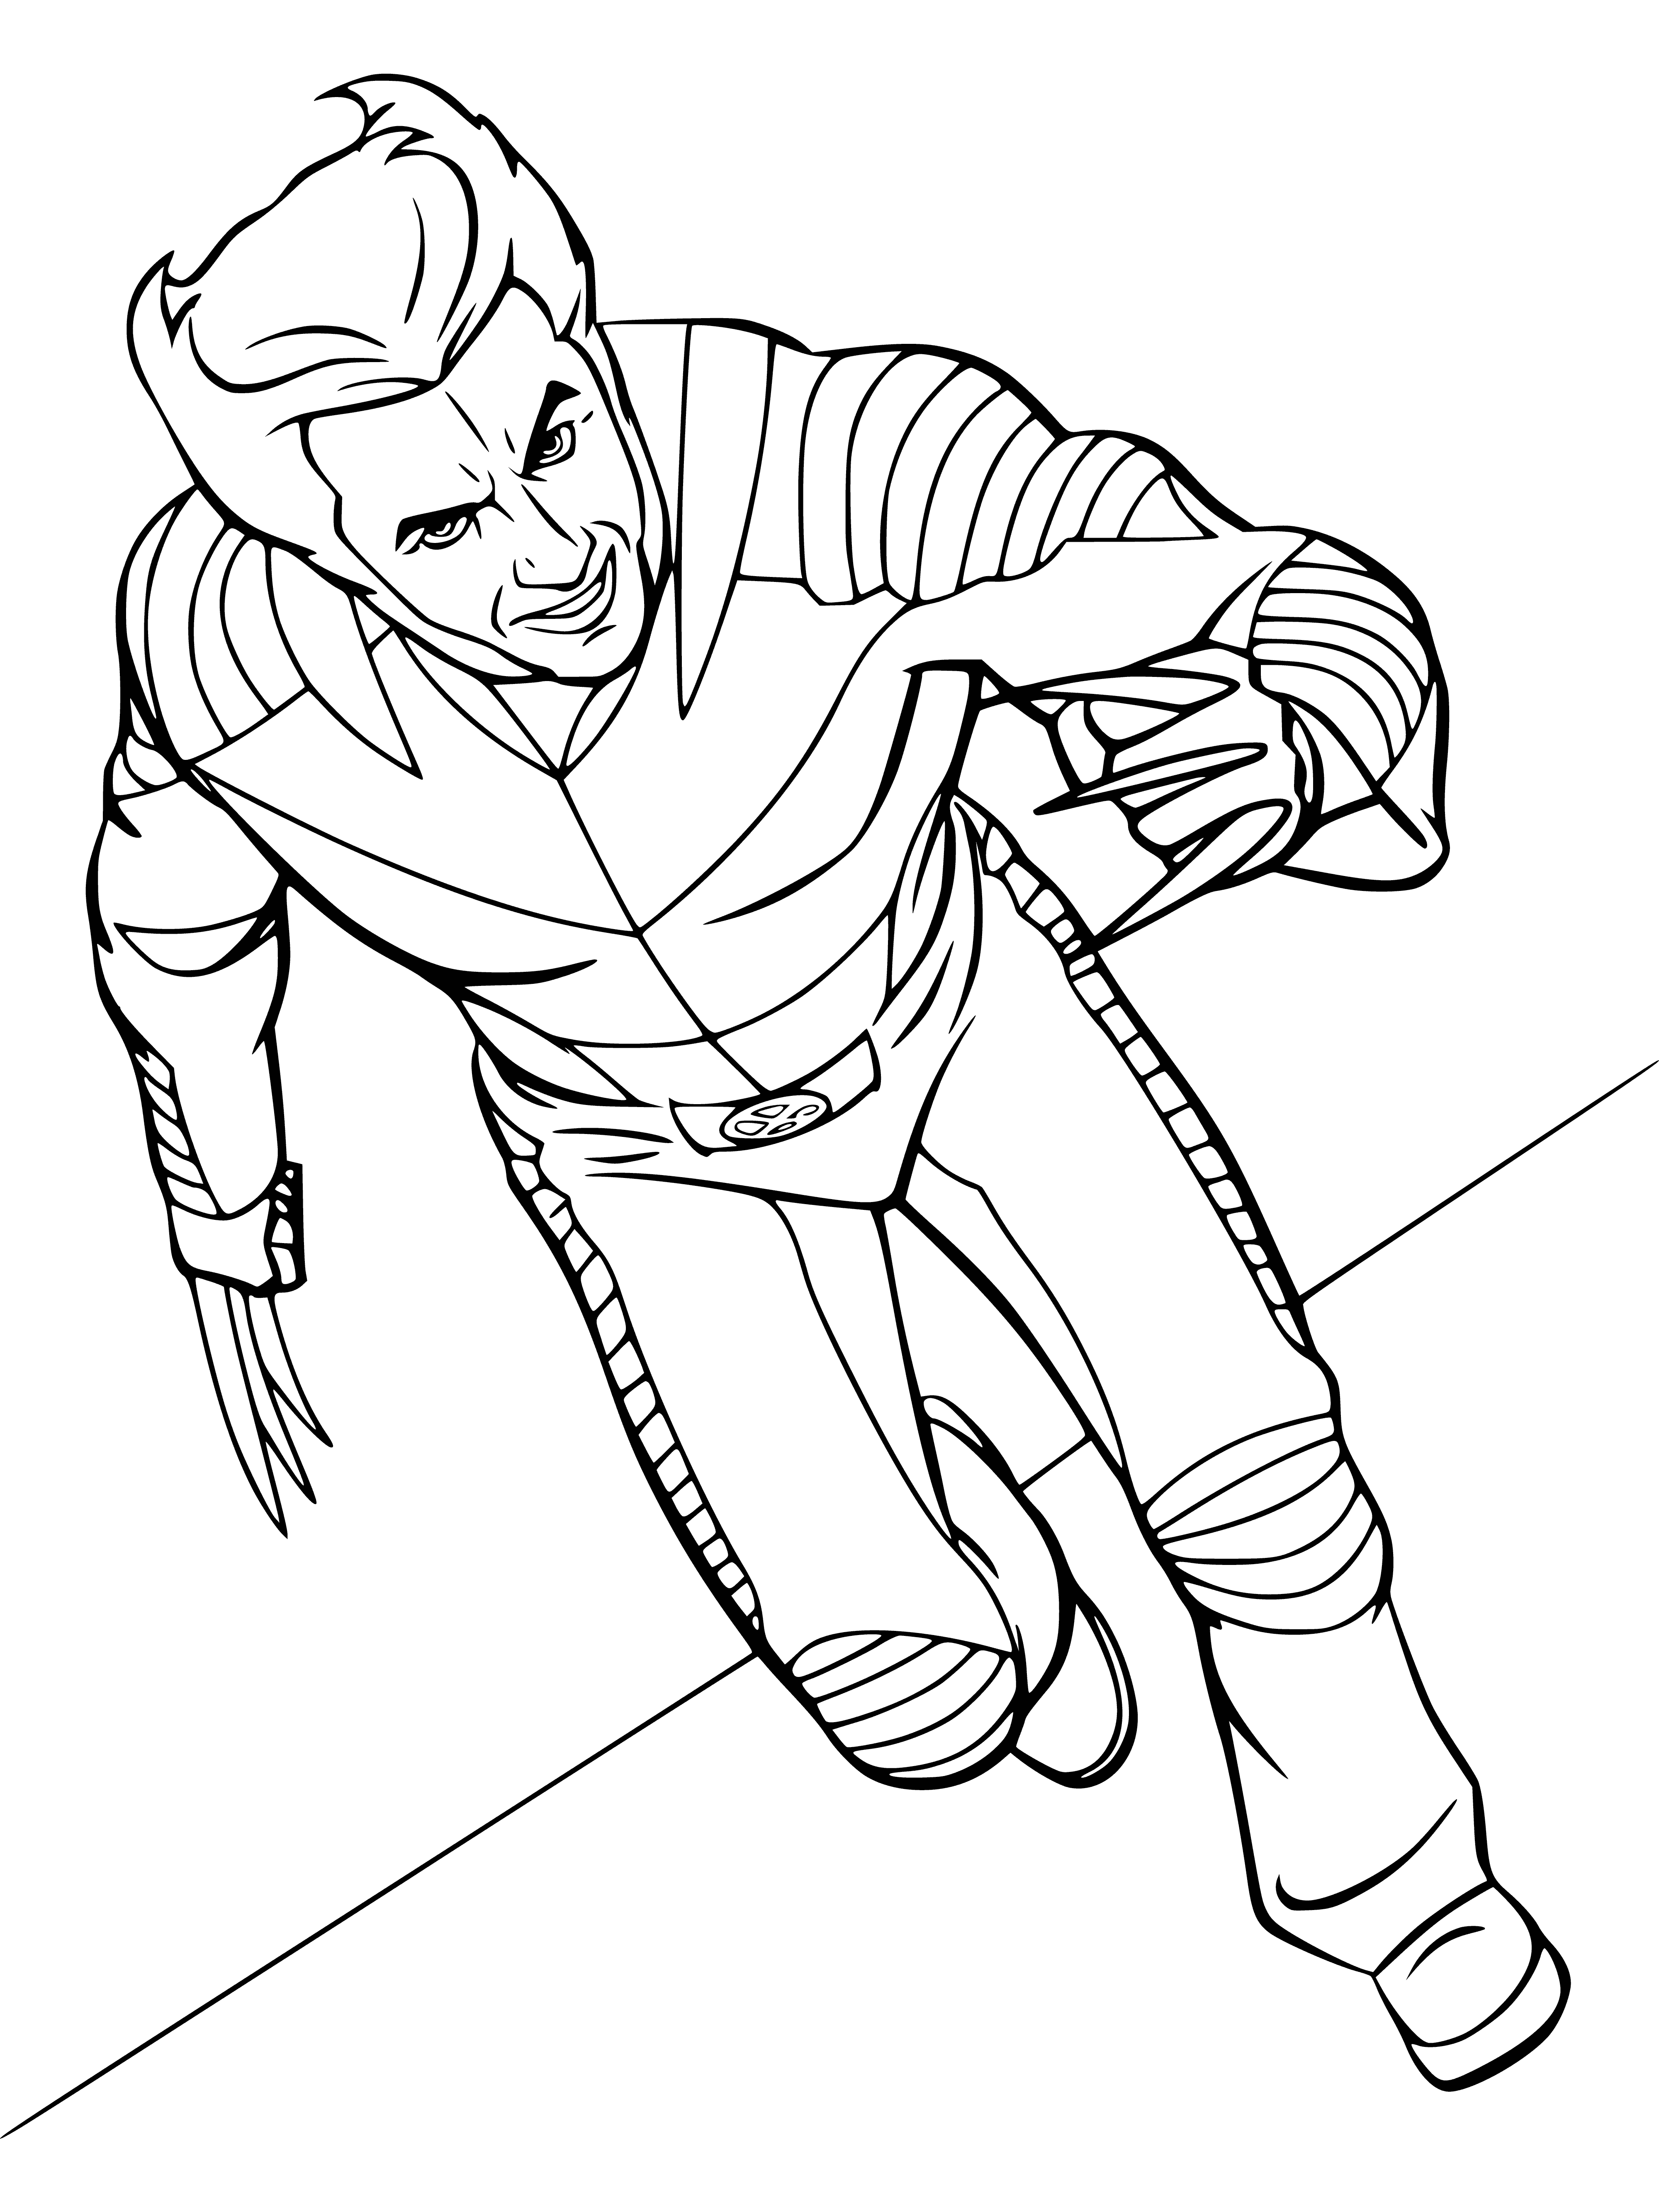 Wolverine coloring page